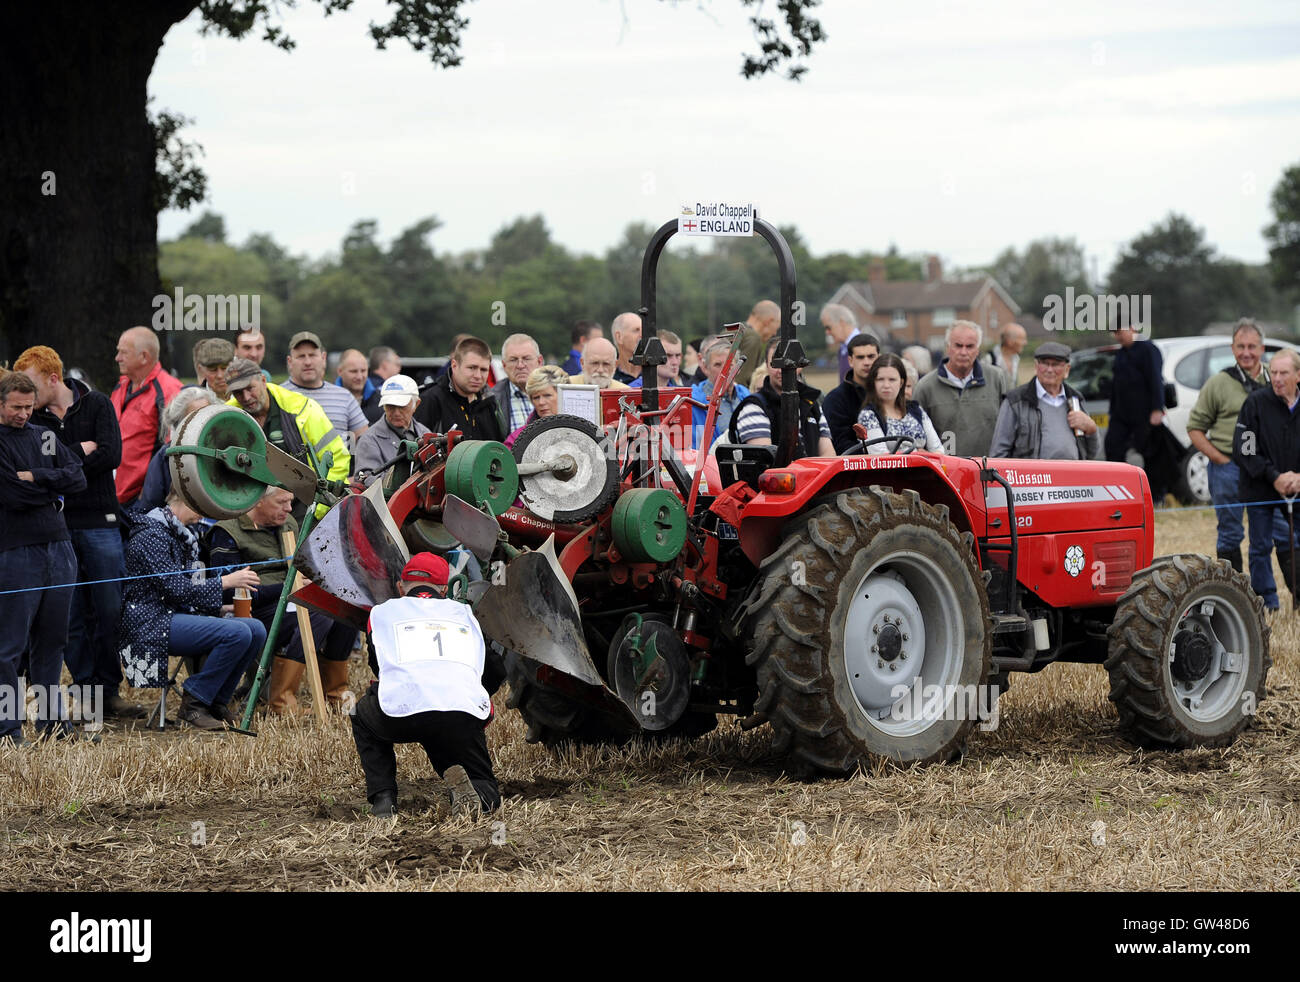 David Chappell of England at the World Ploughing Contest at Crockey Hill near York, where representatives from over thirty countries competed in various categories that included vintage and horse drawn alongside conventional tractors. Stock Photo